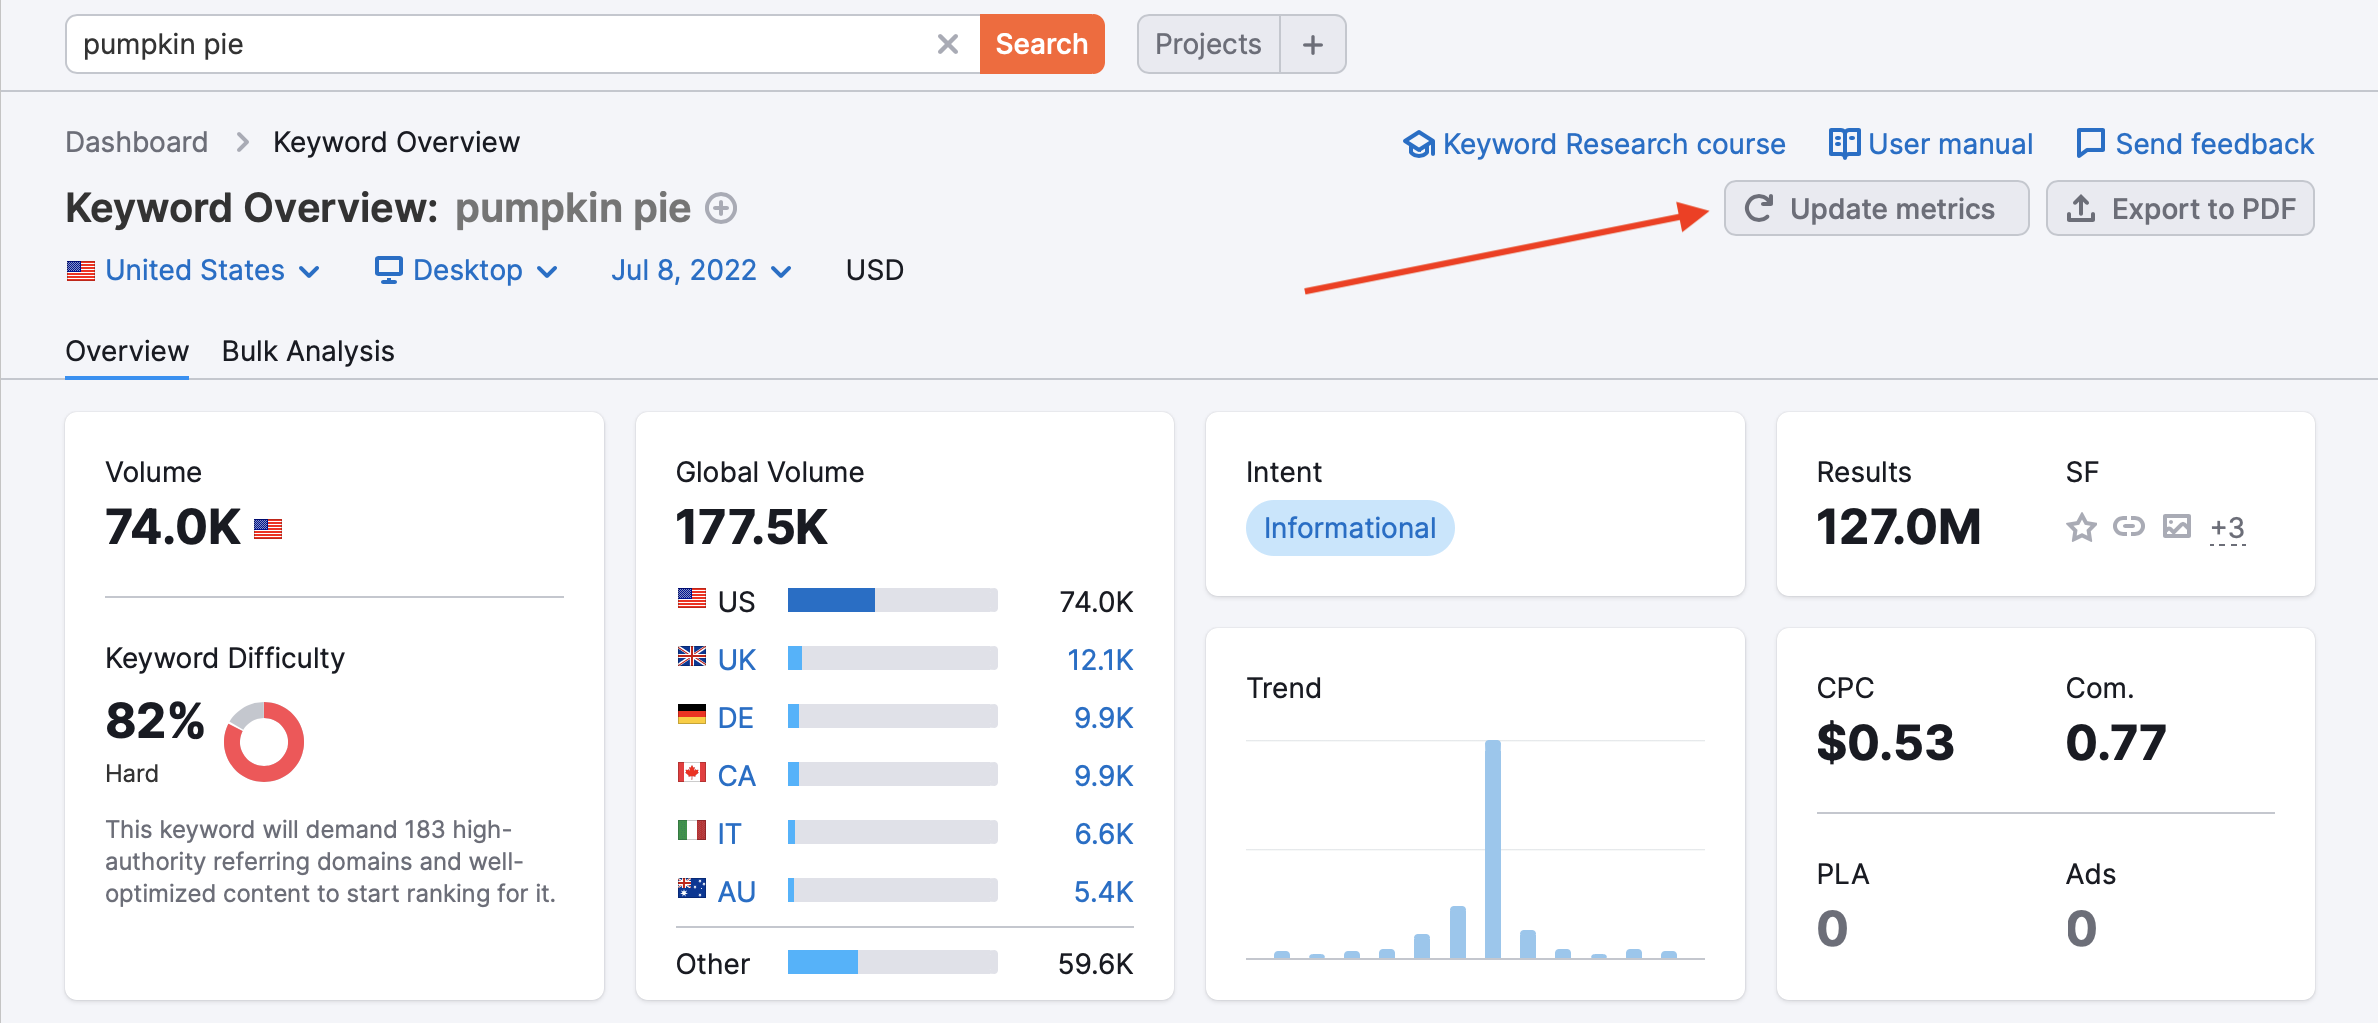 Update Metrics button in Keyword Overview